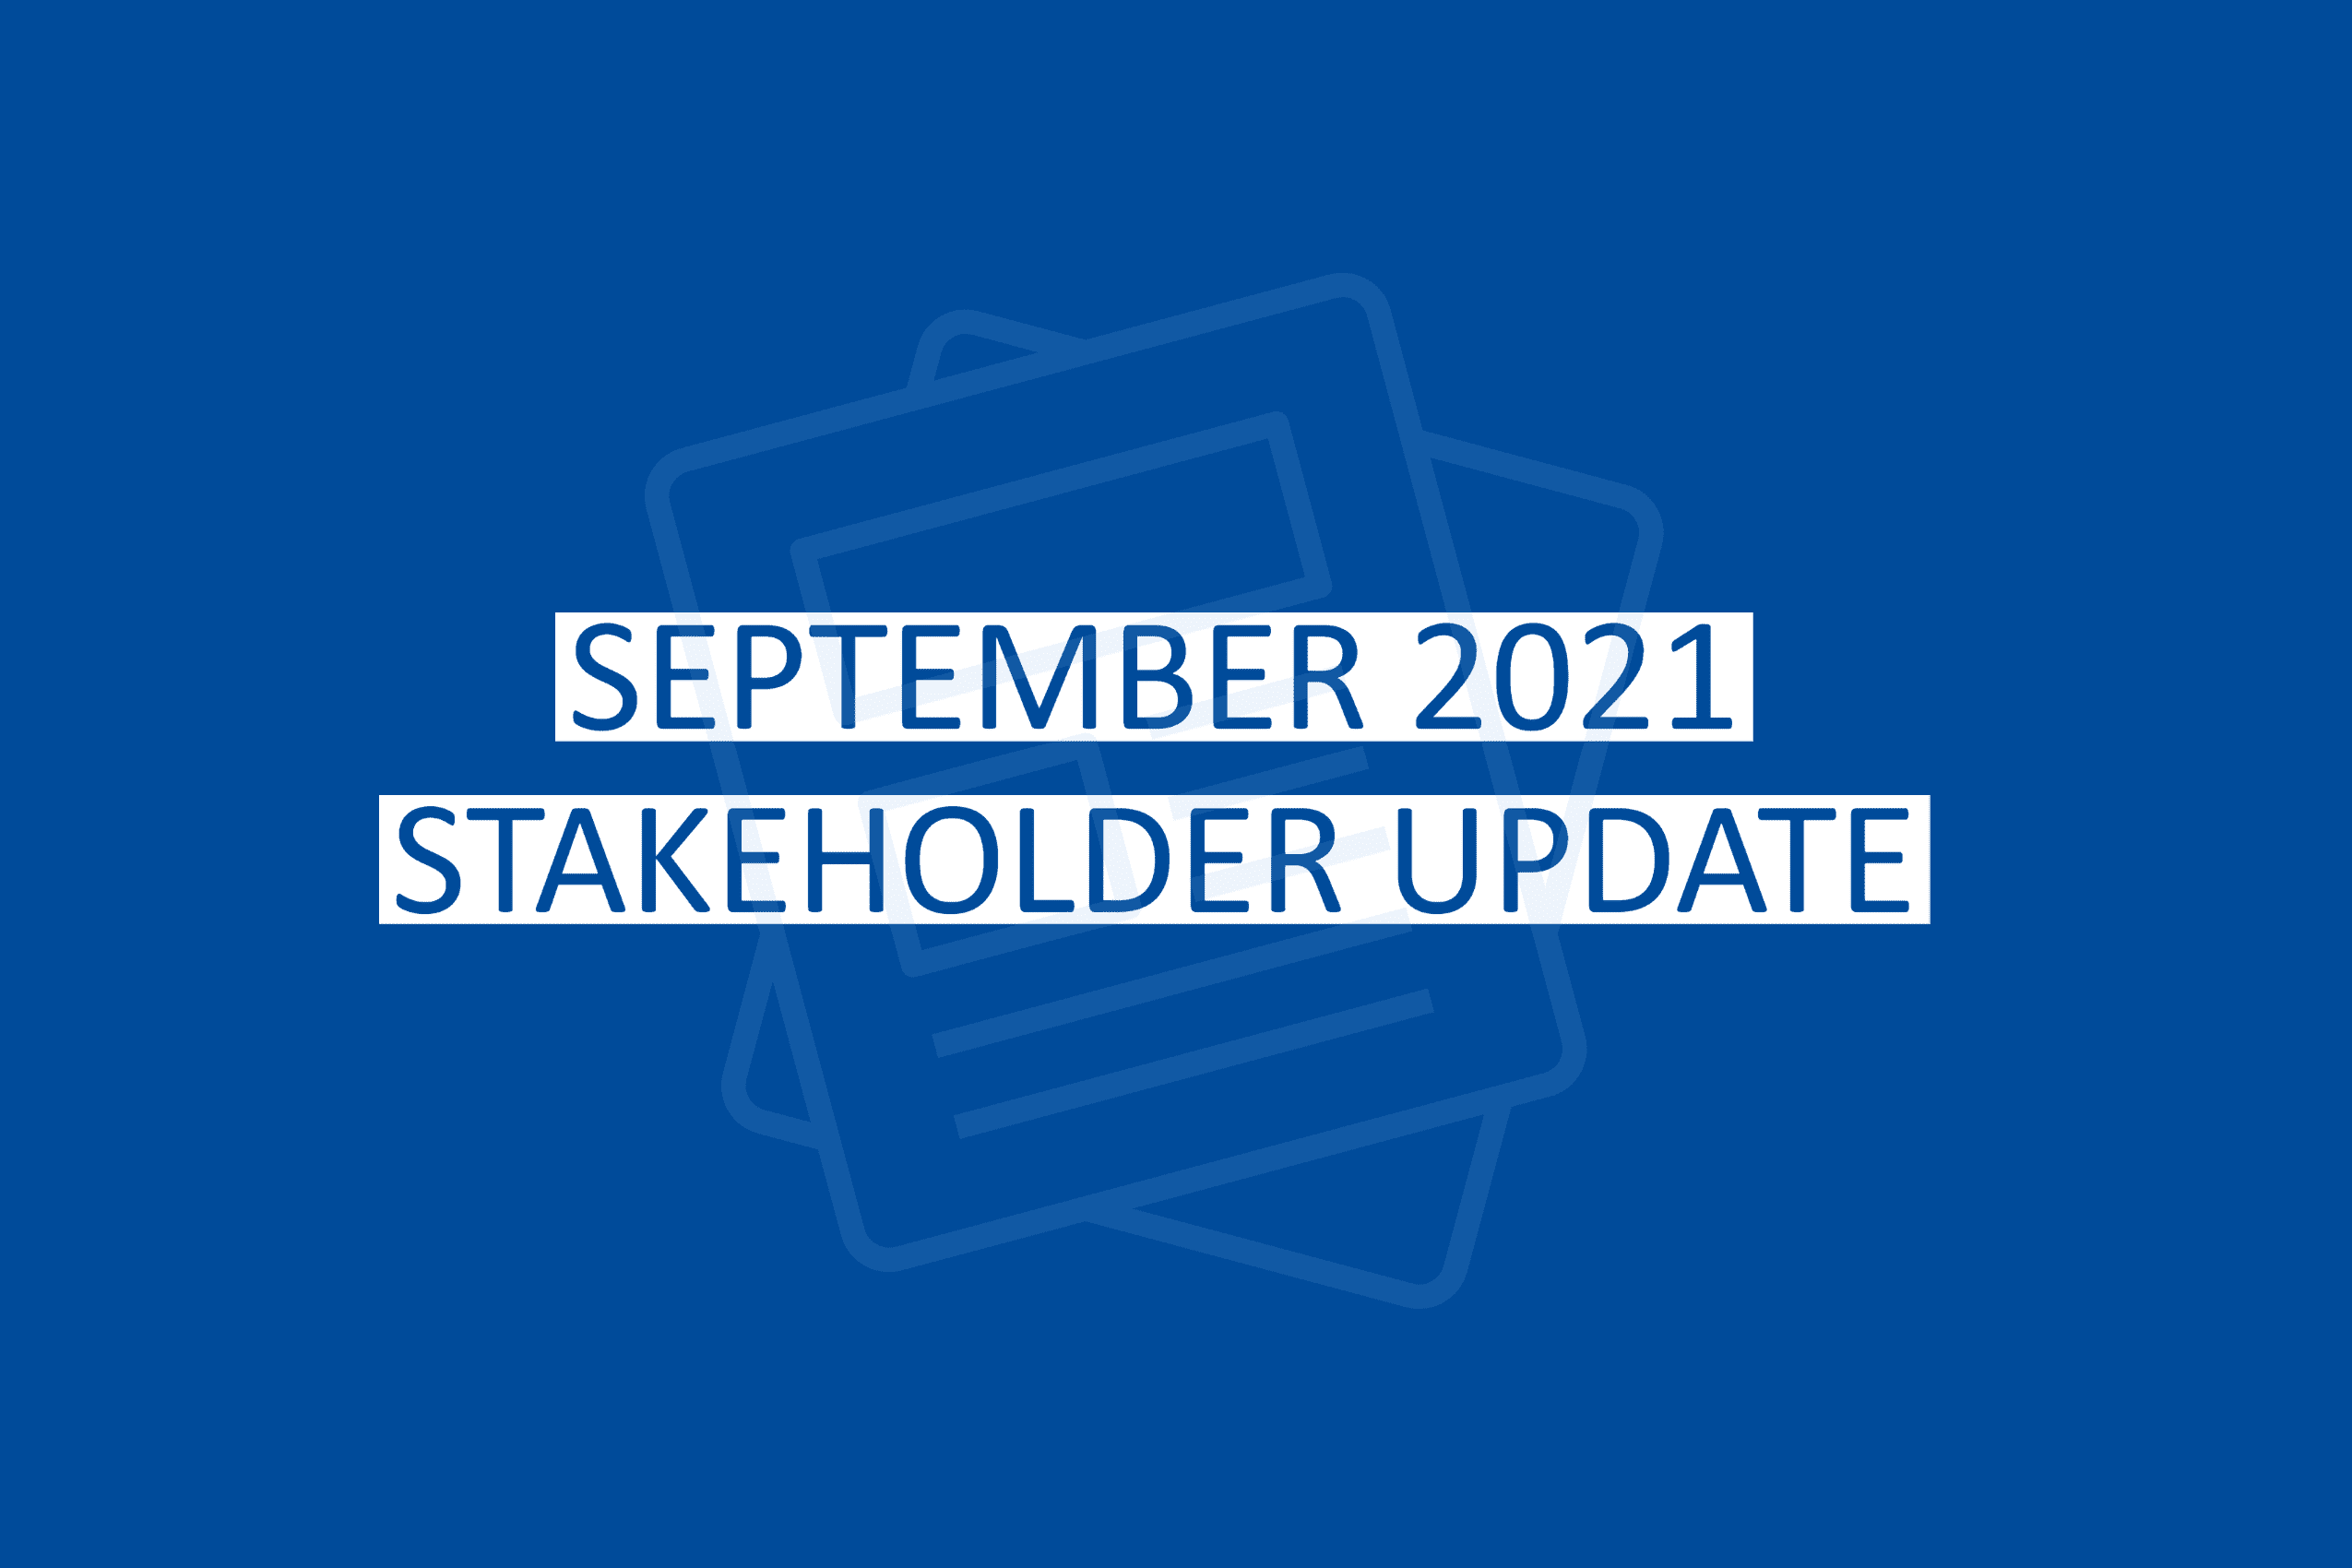 Image is of a blue background with white text that says September 2021 Stakeholder Update'